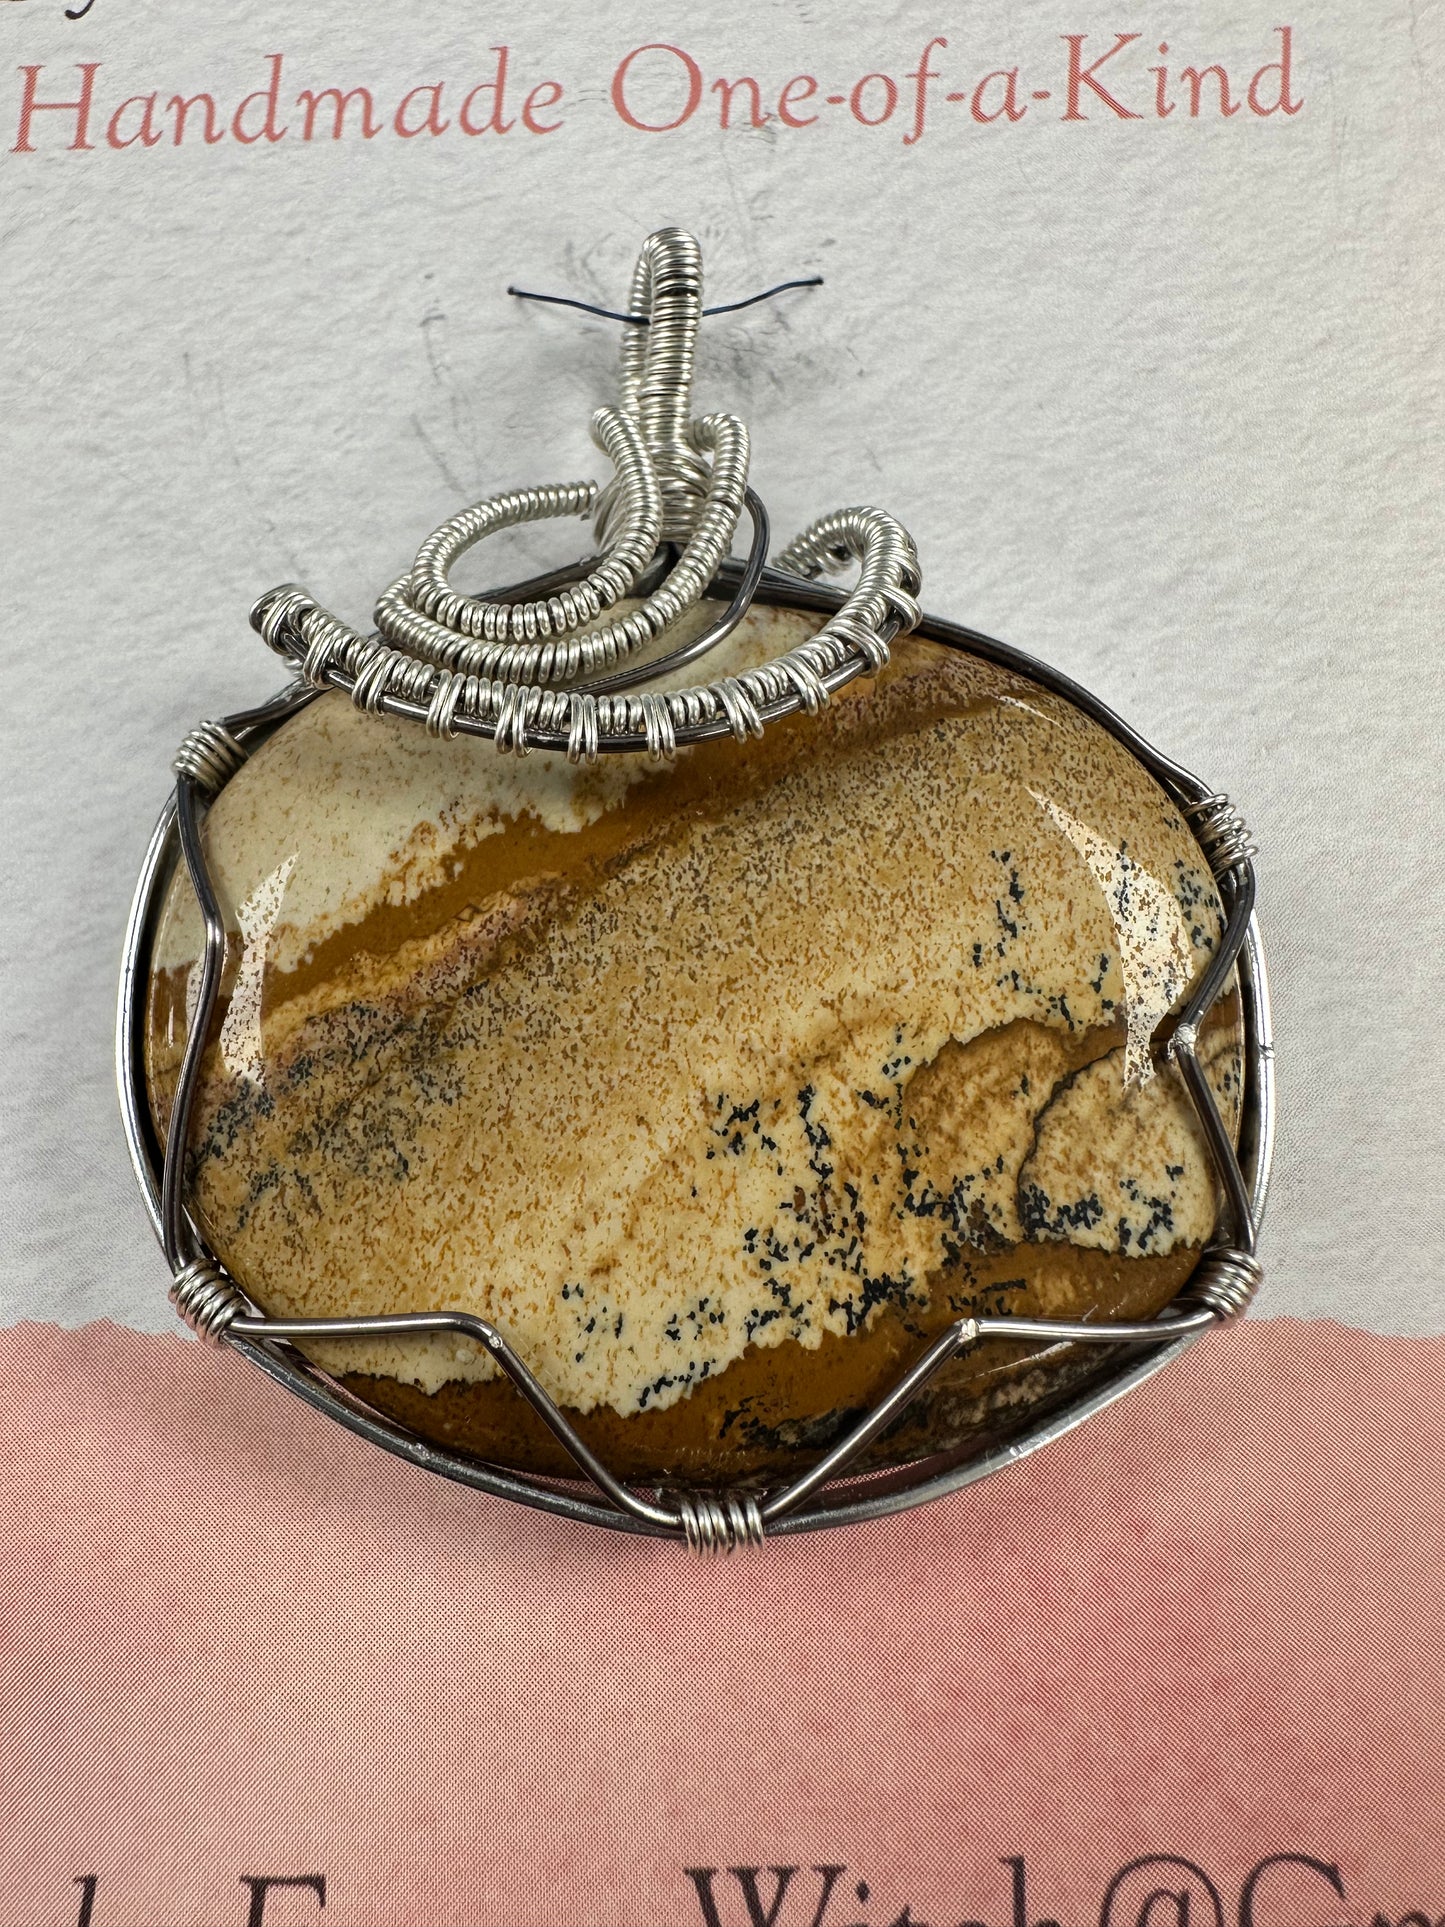 Pooka the Energy Witch - Wire Wrap Pendant - Picture Jasper